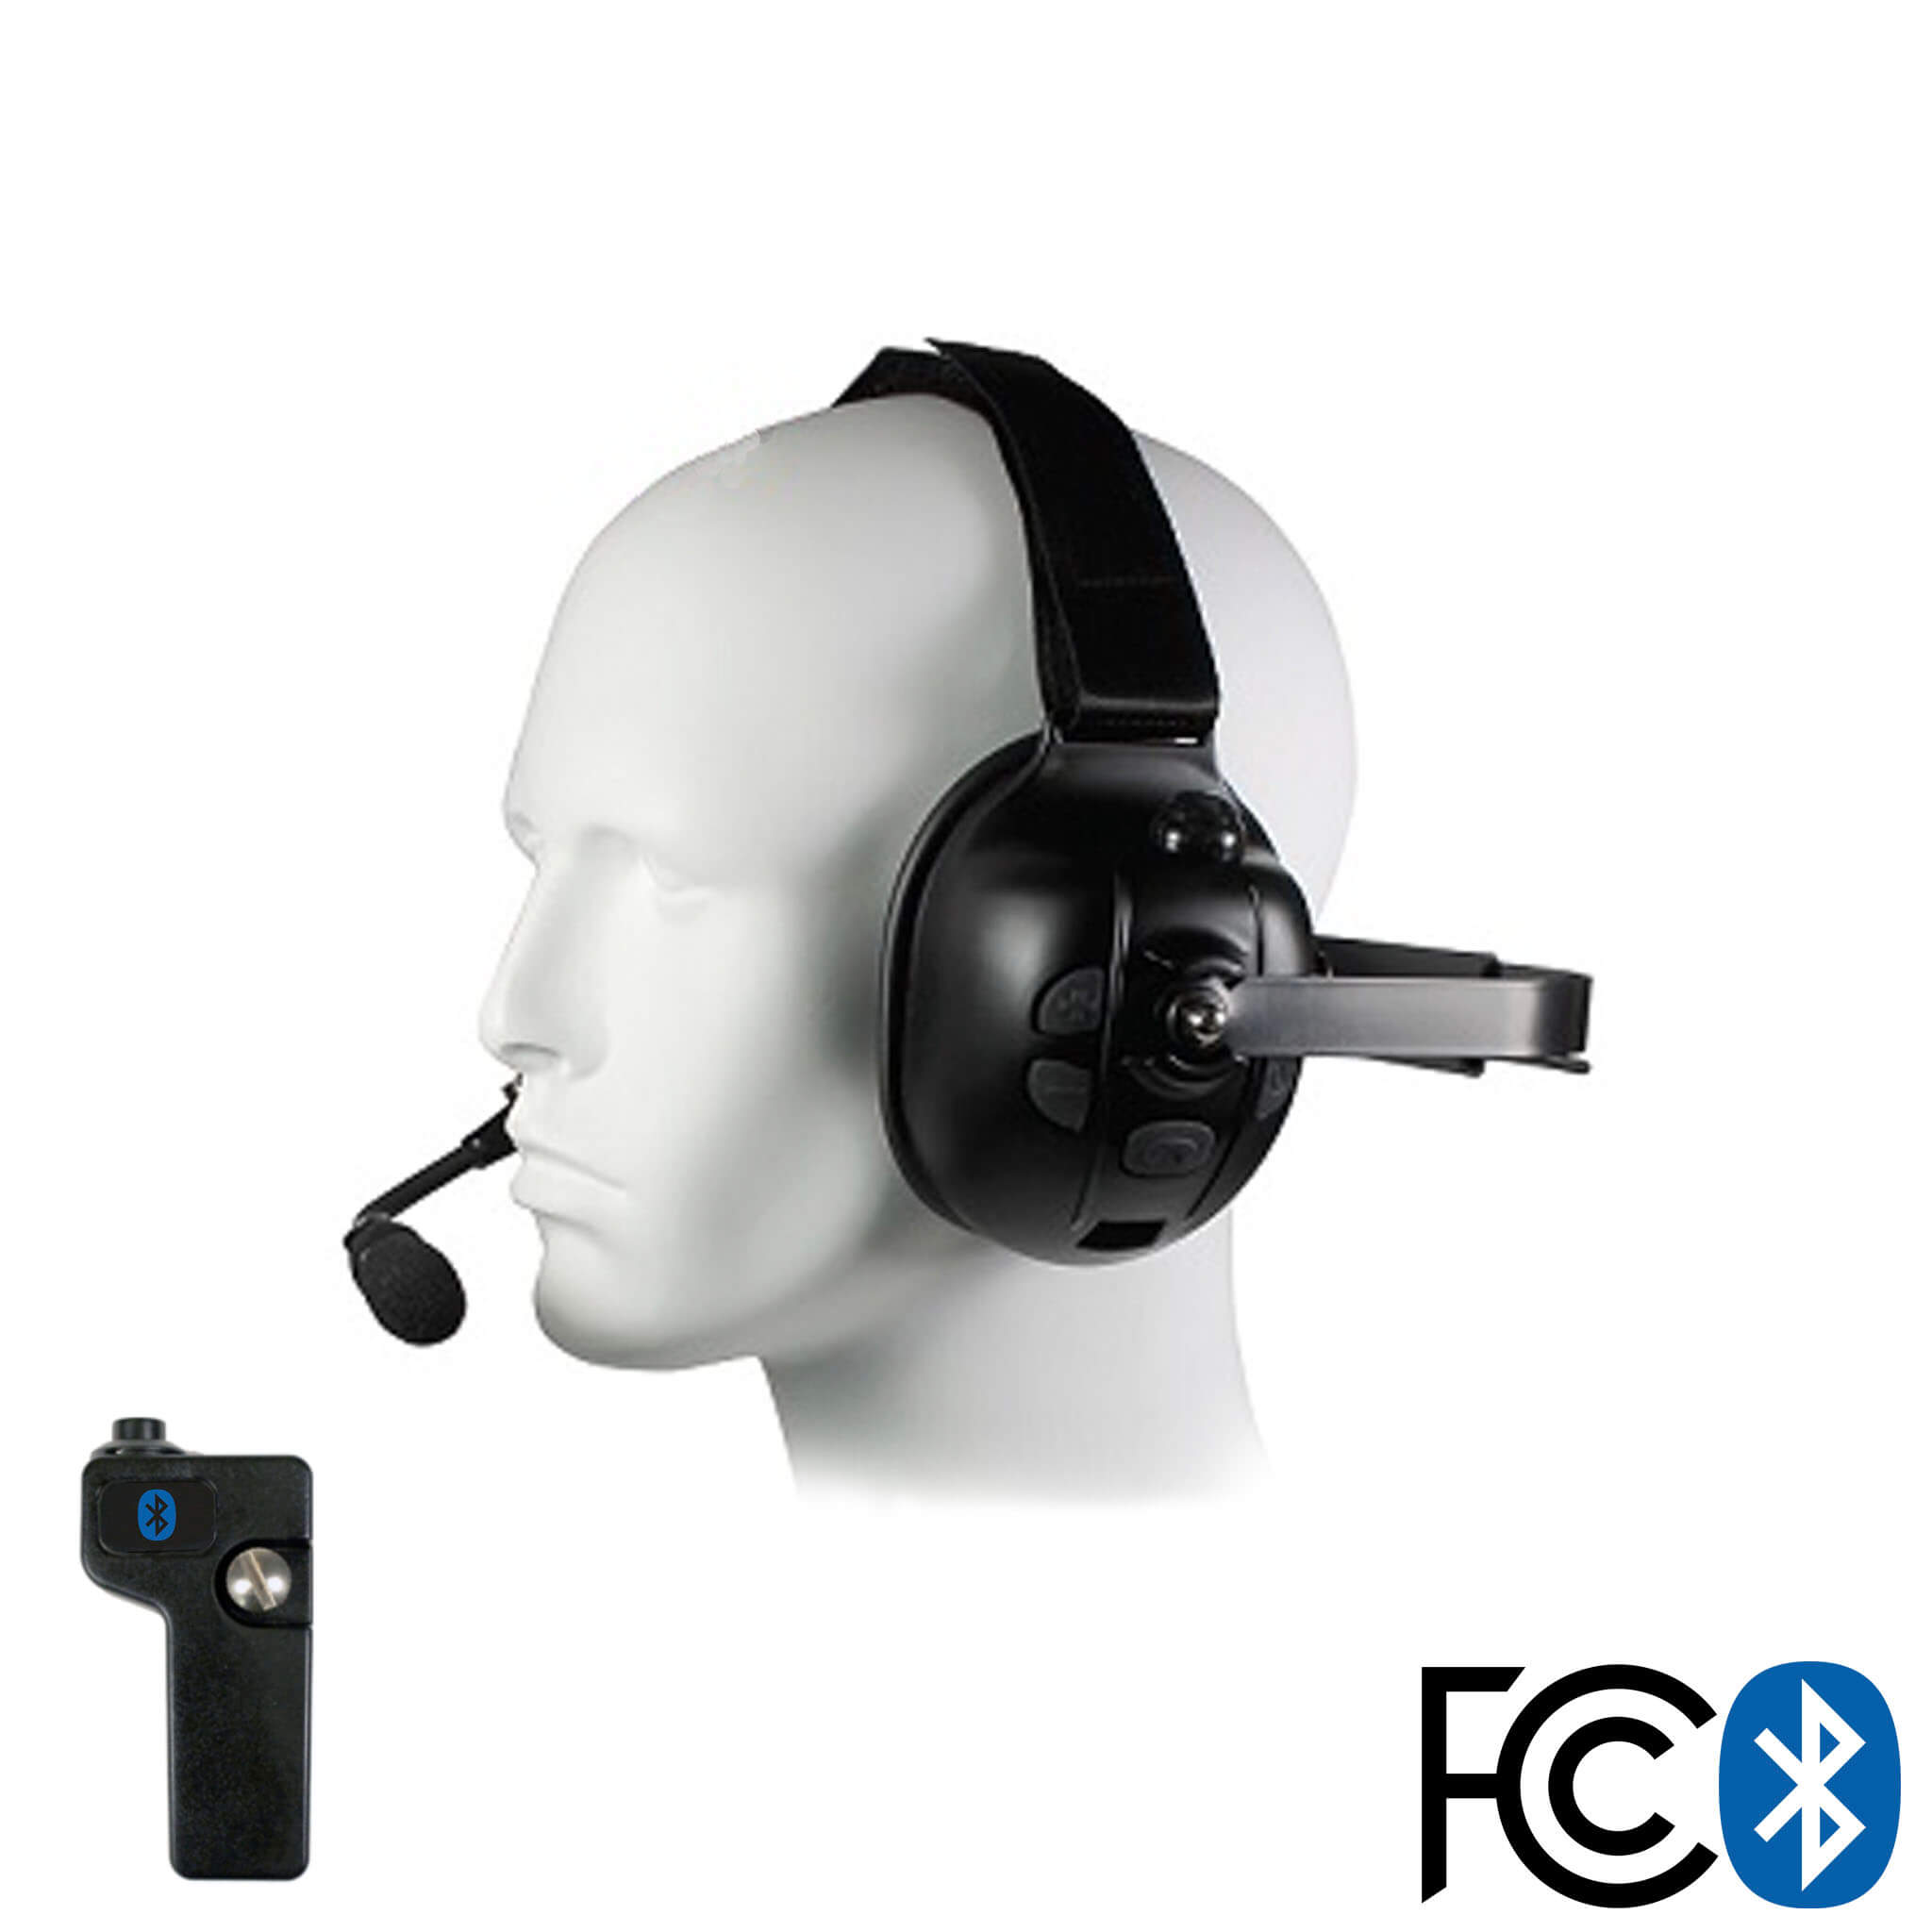 Bluetooth Headset & Radio Adapter Kit for Racing/Other Applications - –  Comm Gear Supply